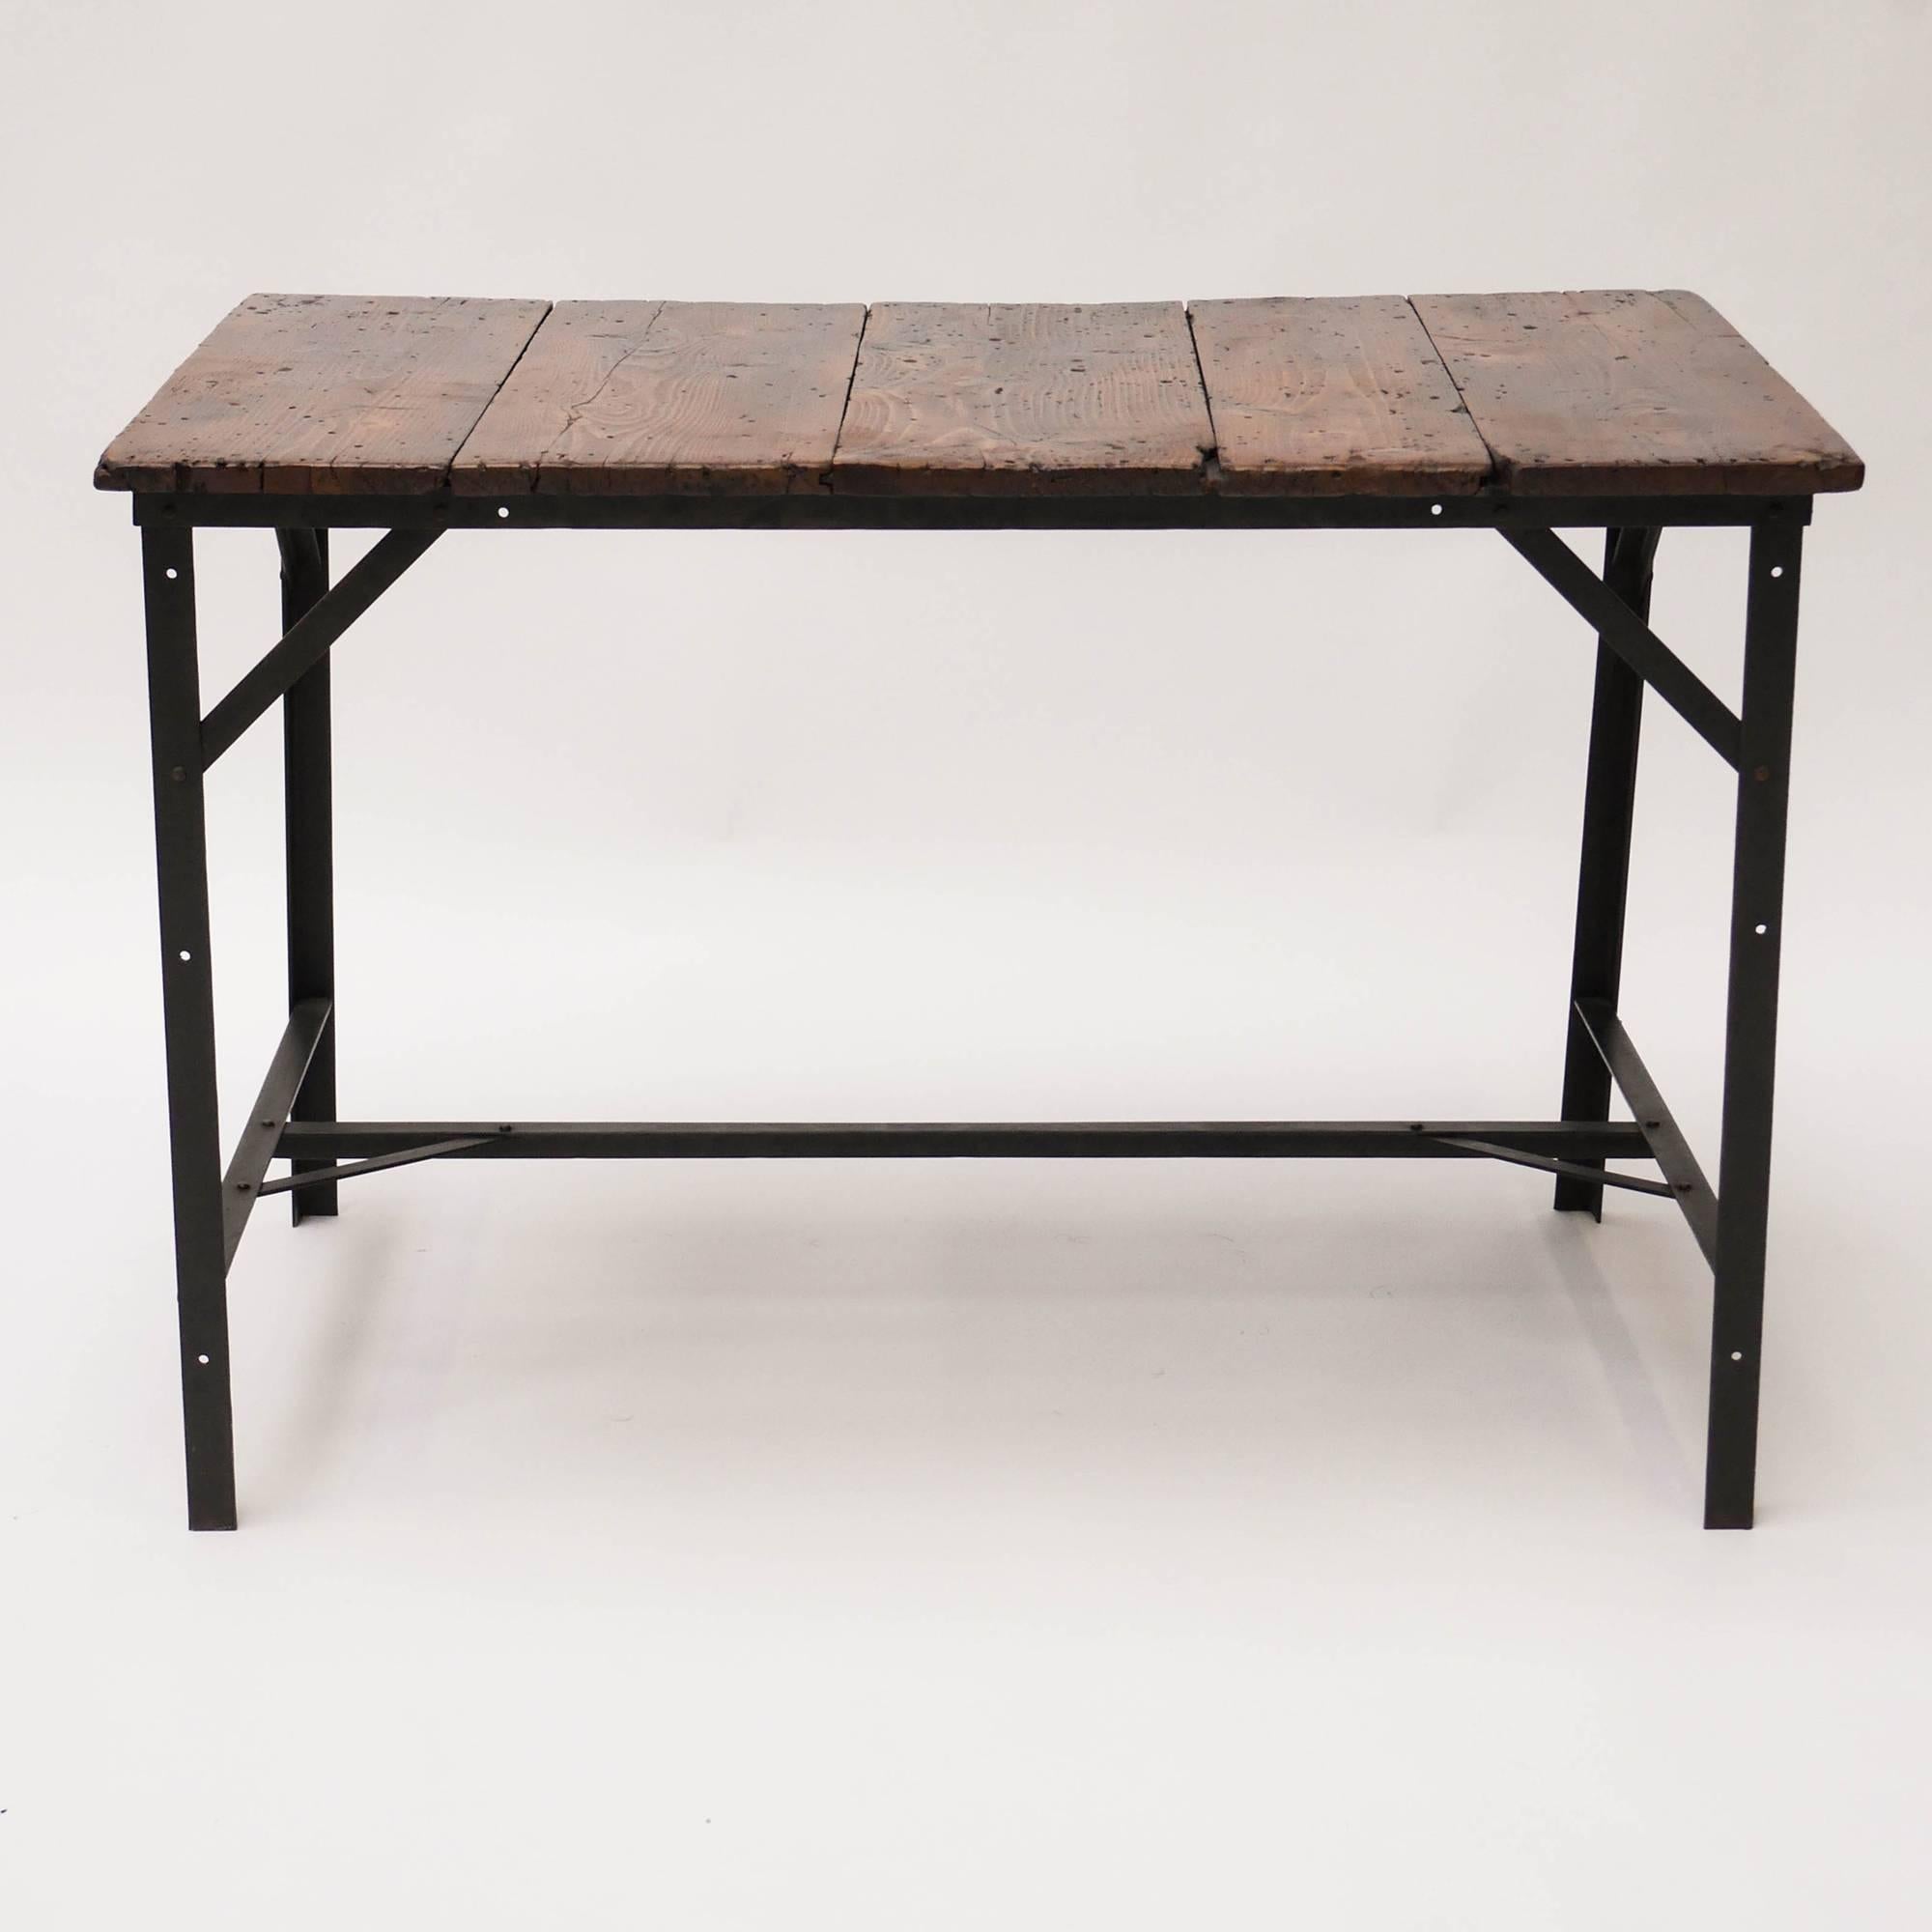 Patinated Wooden Workbench, Origin France, Early 20th Century